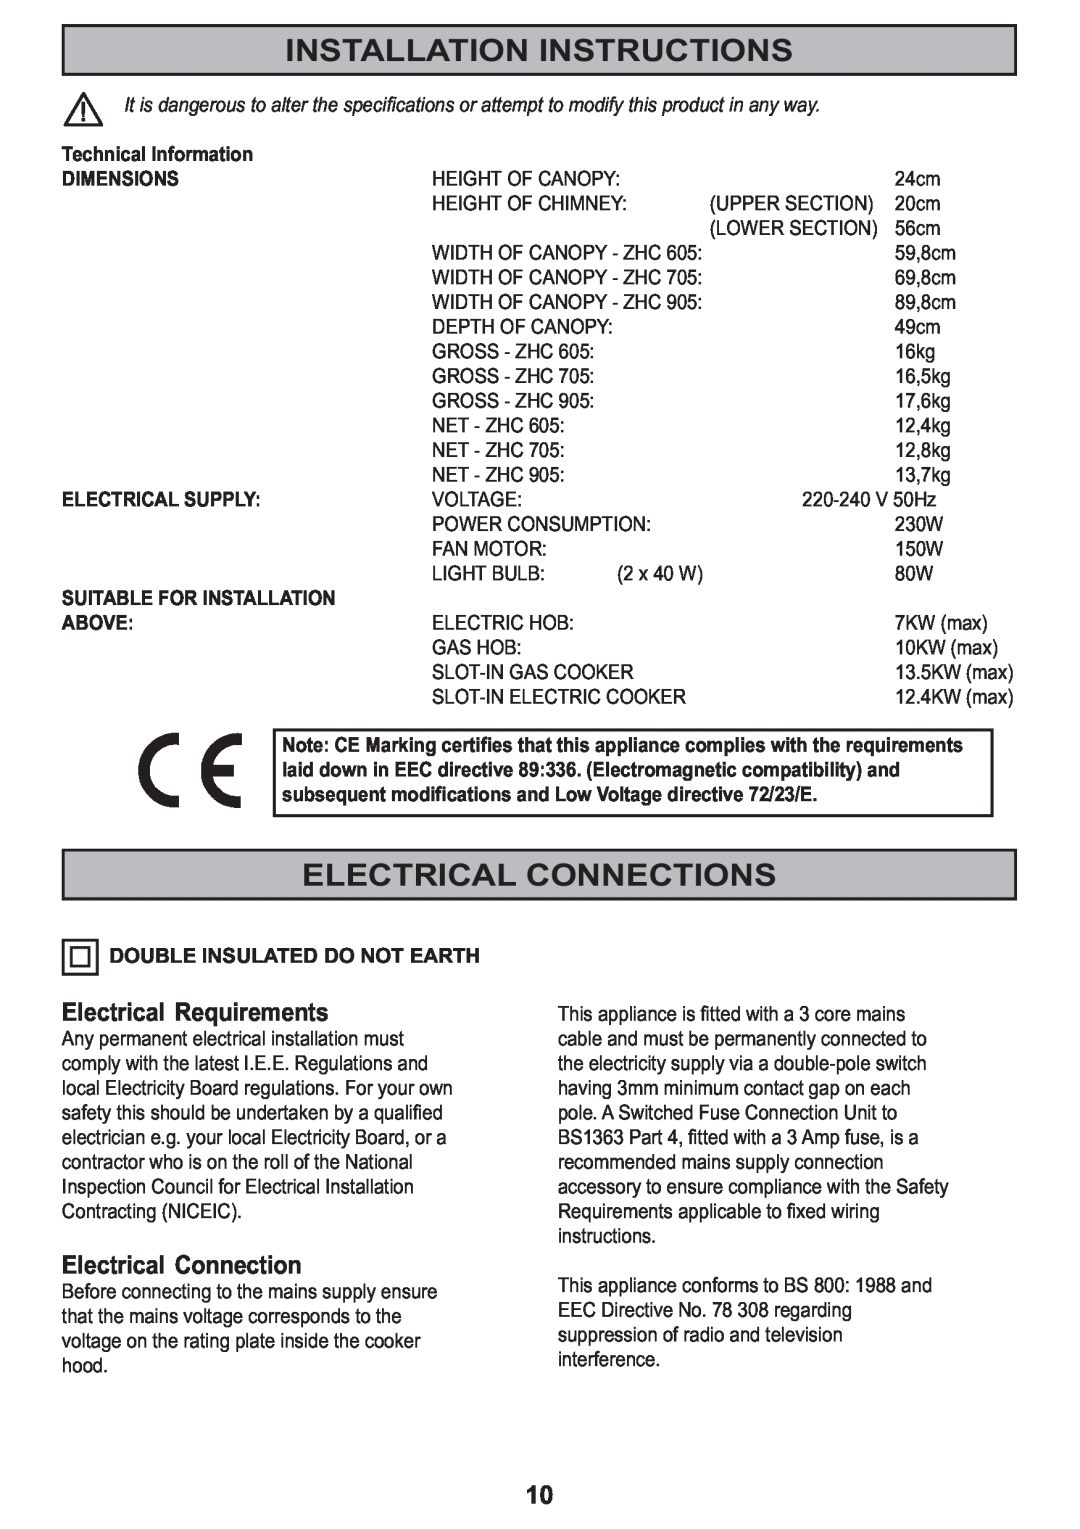 Zanussi ZHC605, ZHC705, ZHC905 Installation Instructions, Electrical Connections, Dimensions, Suitable For Installation 